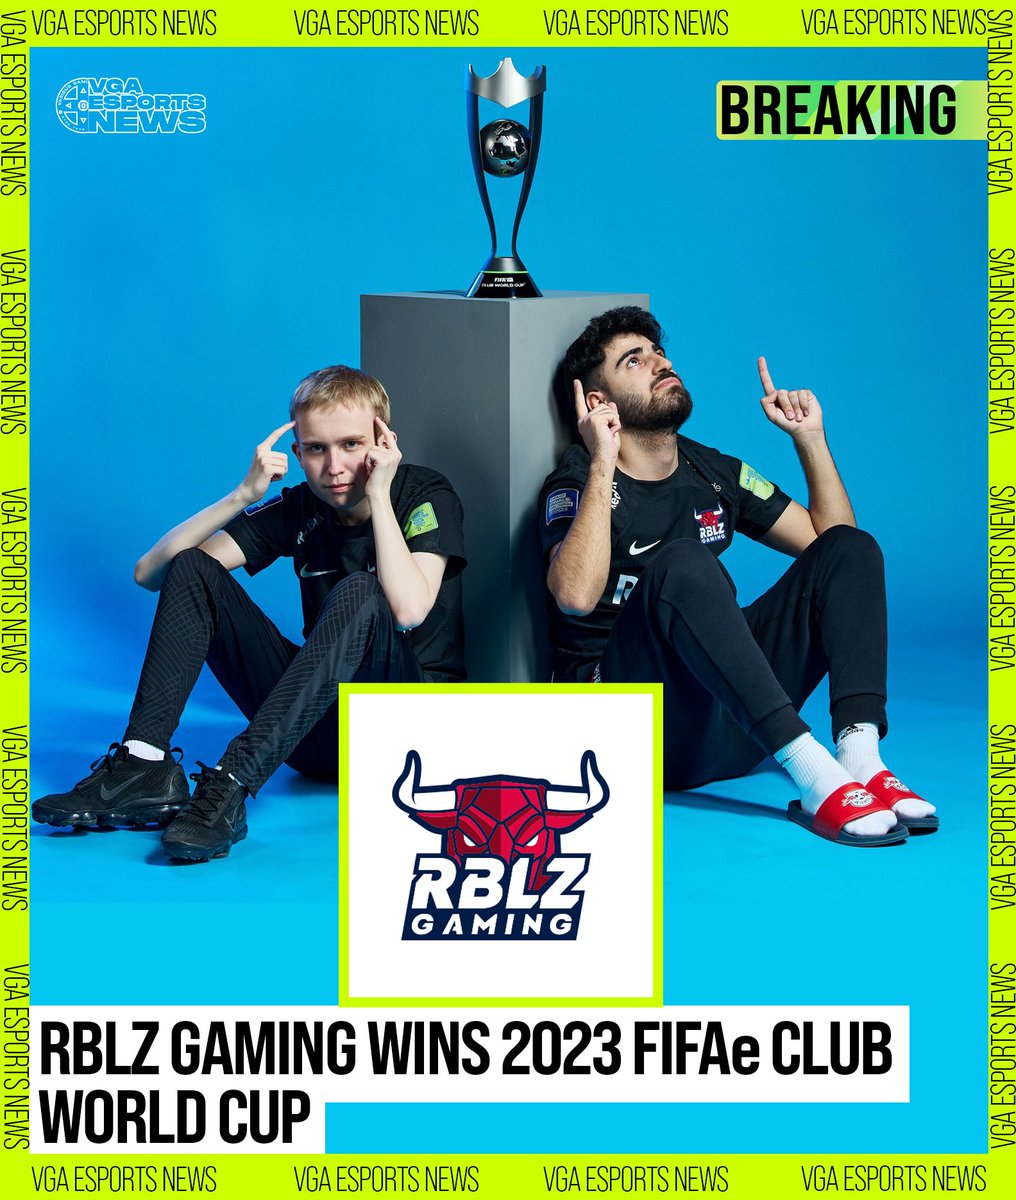 BREAKING! 
RBLZ Gaming Wins 2023 FIFAe Club World Cup. #FeCWC 
cc @rblzgaming @RBLZ_Vejrgang @rblz_umut